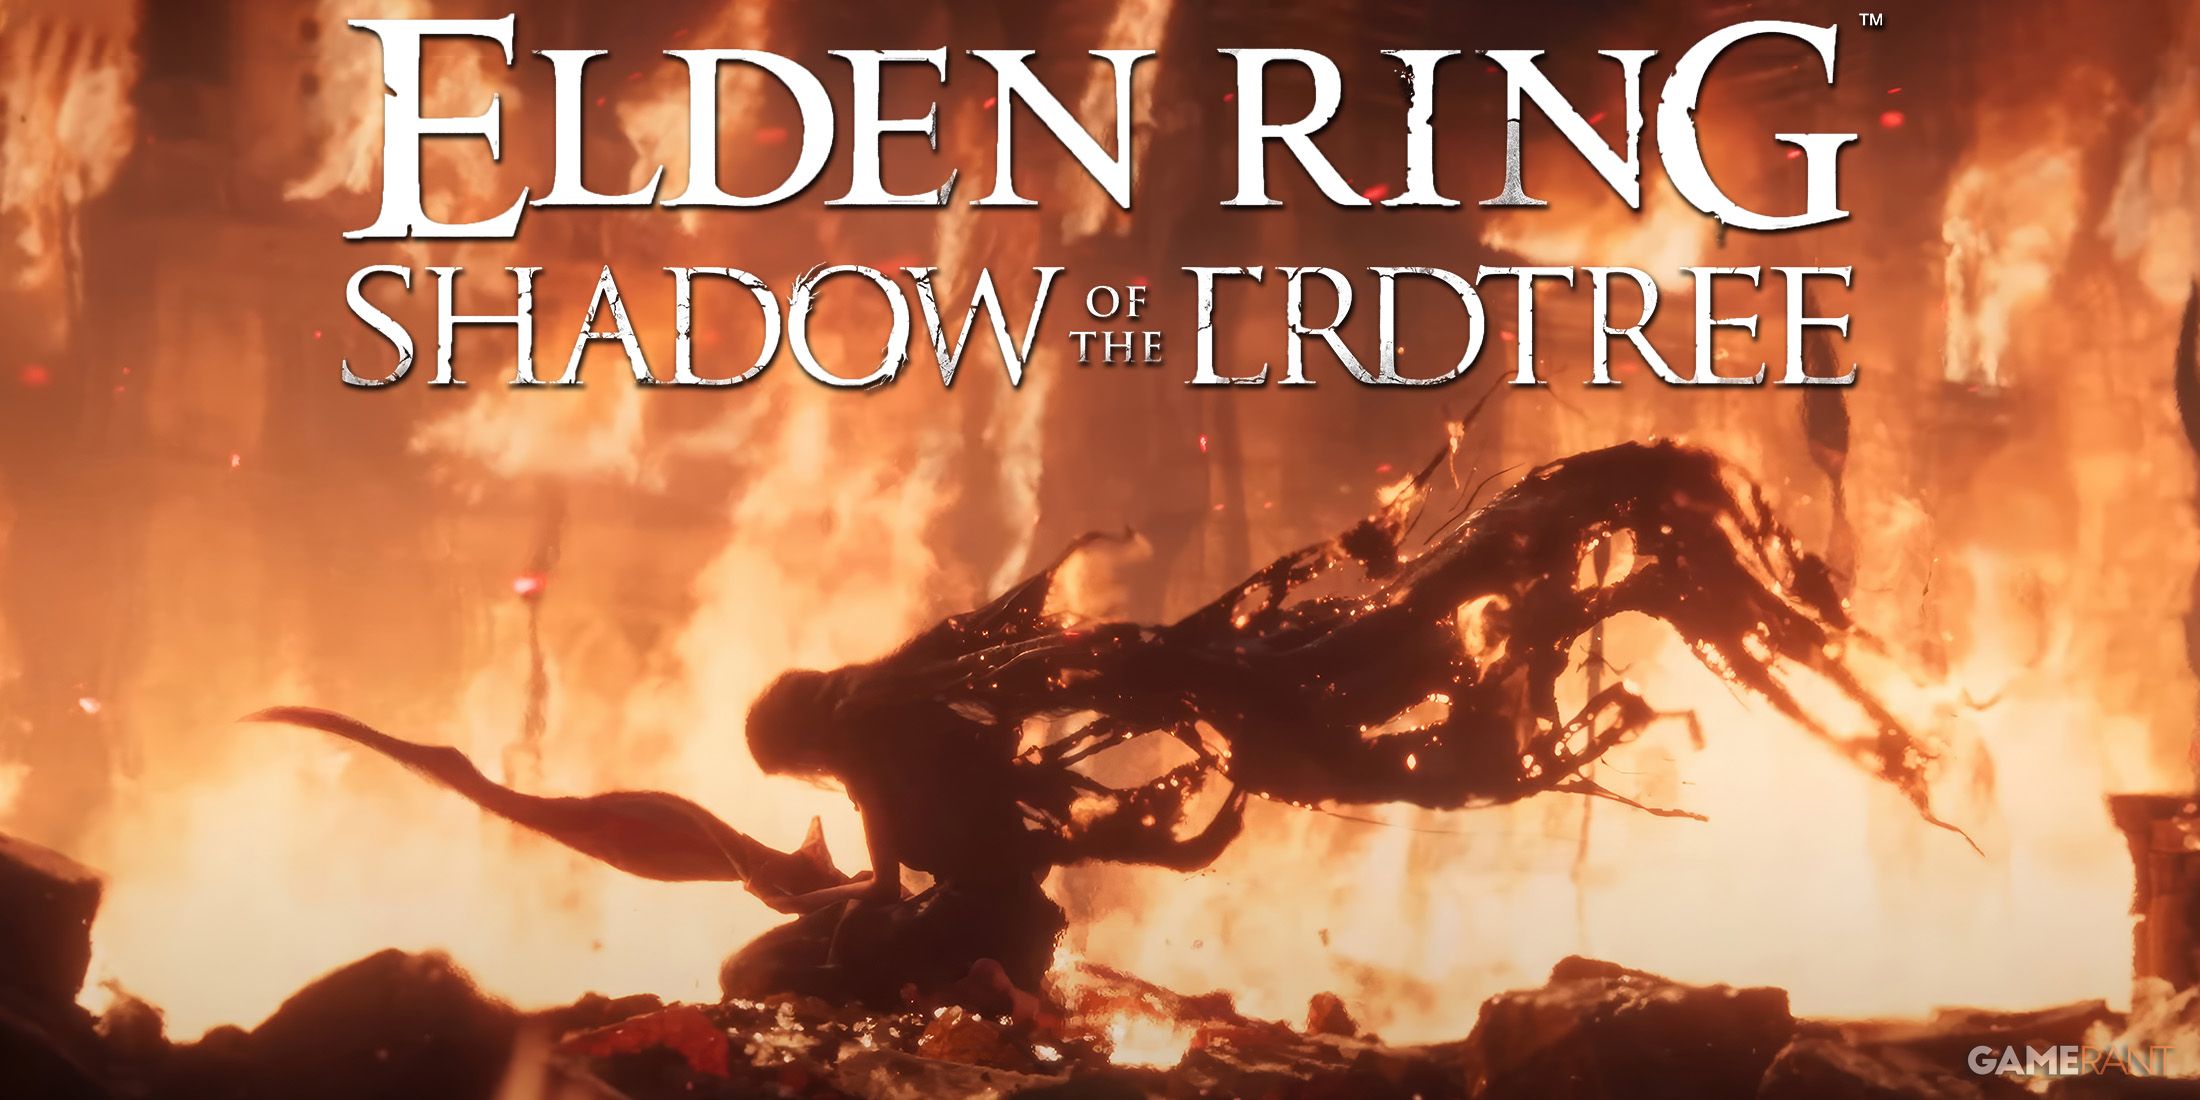 Elden Ring Shadow of the Erdtree logo over story trailer screenshot character kneeling surrounded by flames